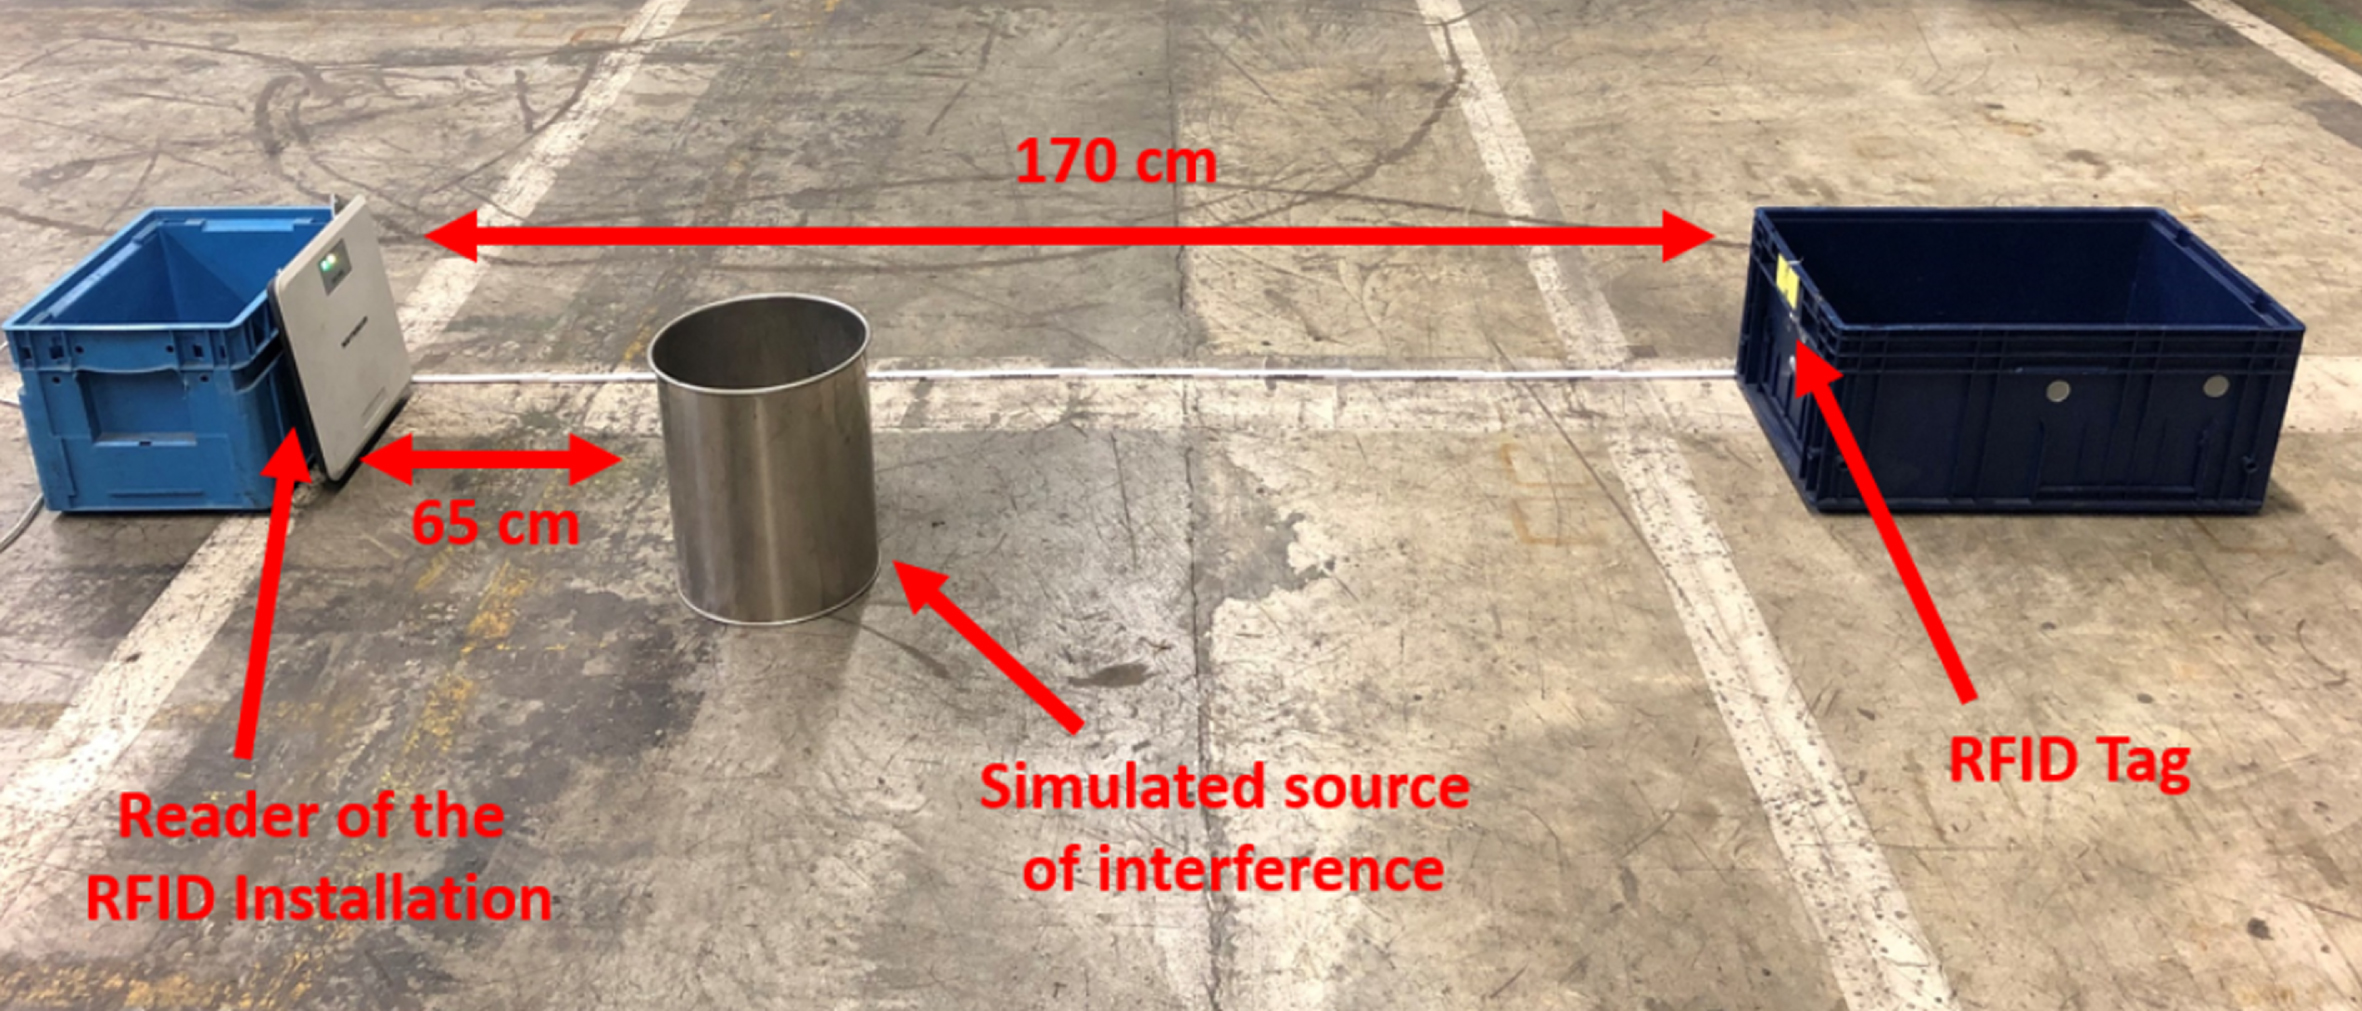 Experimental setup for the verification of the reflection test with interference source (side view).